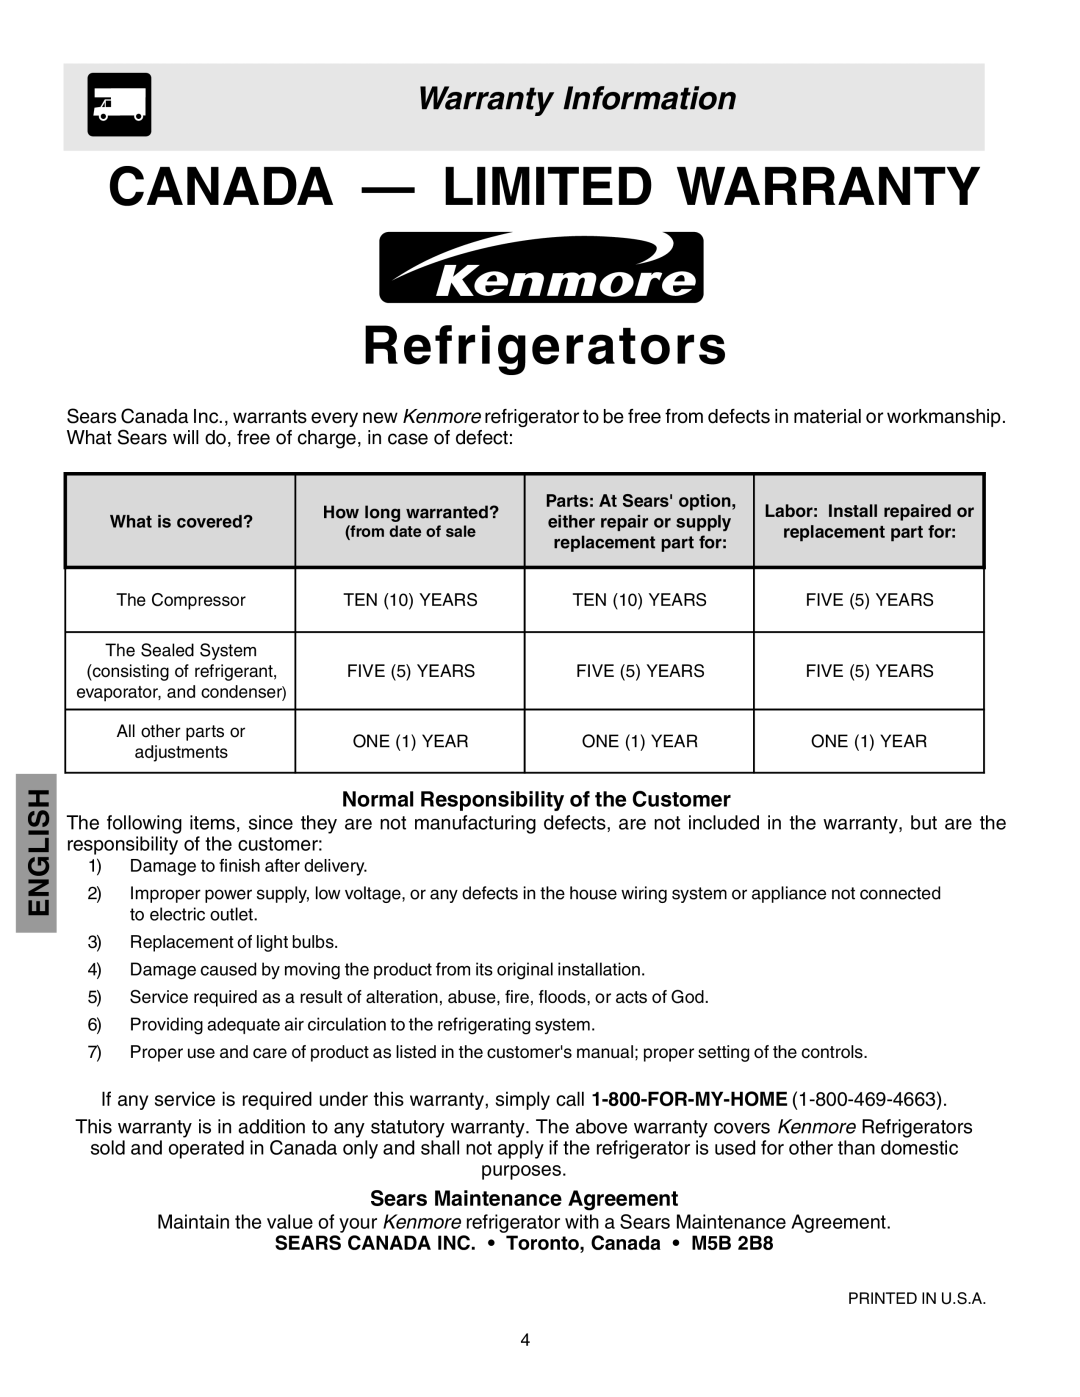 Kenmore 25360721005 Warranty Information, Normal Responsibility of the Customer, Sears Maintenance Agreement, English 